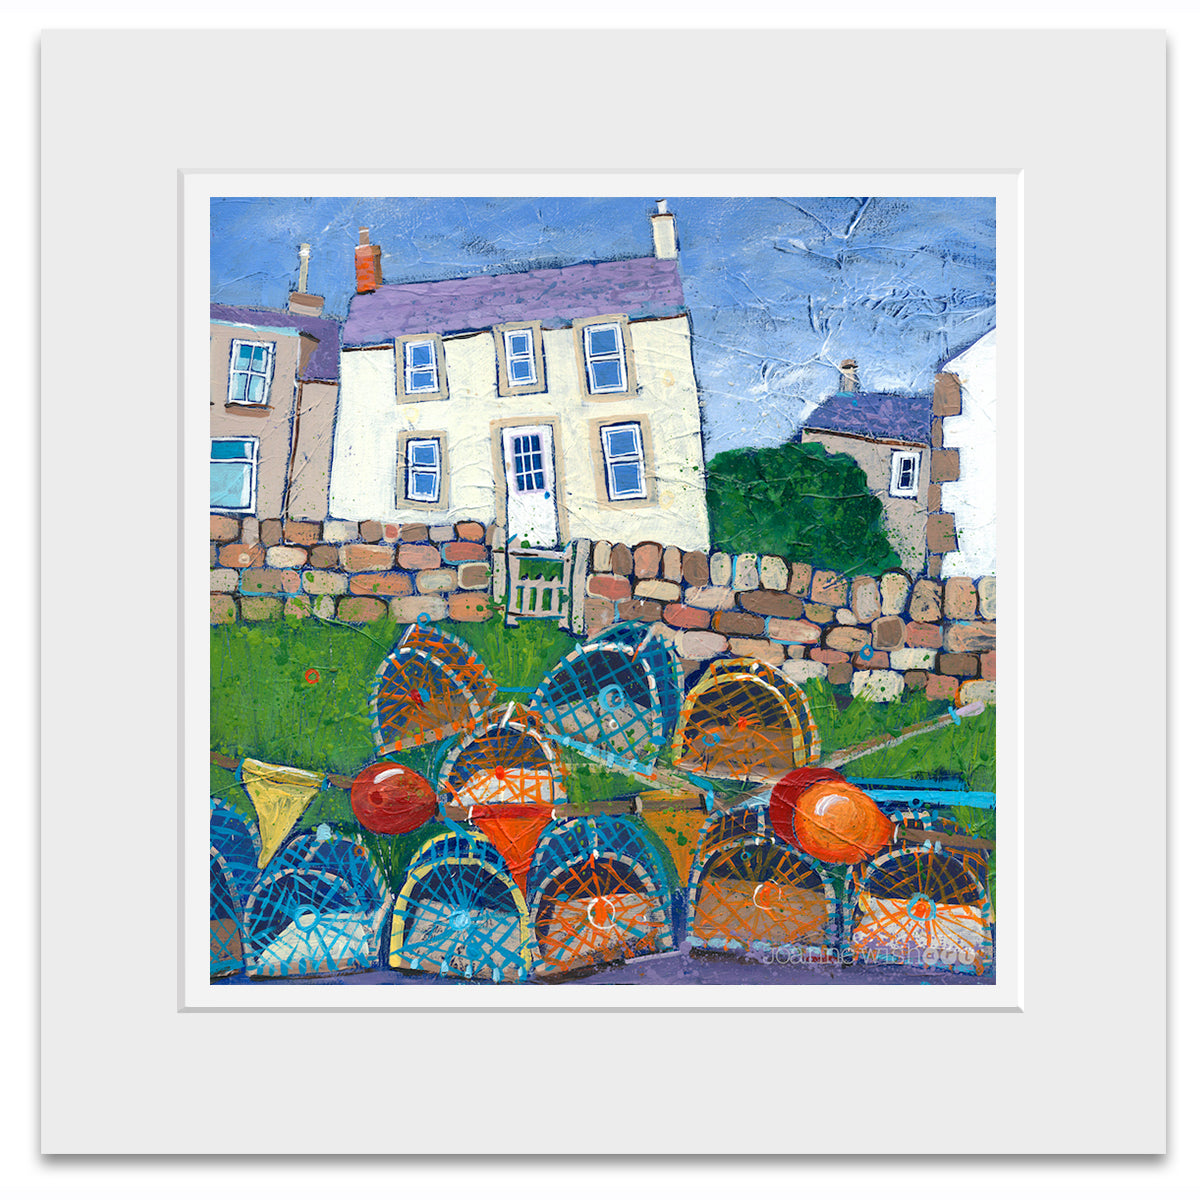 A mounted print of lobster pots and a fishermans cottage painted in a quirky style.